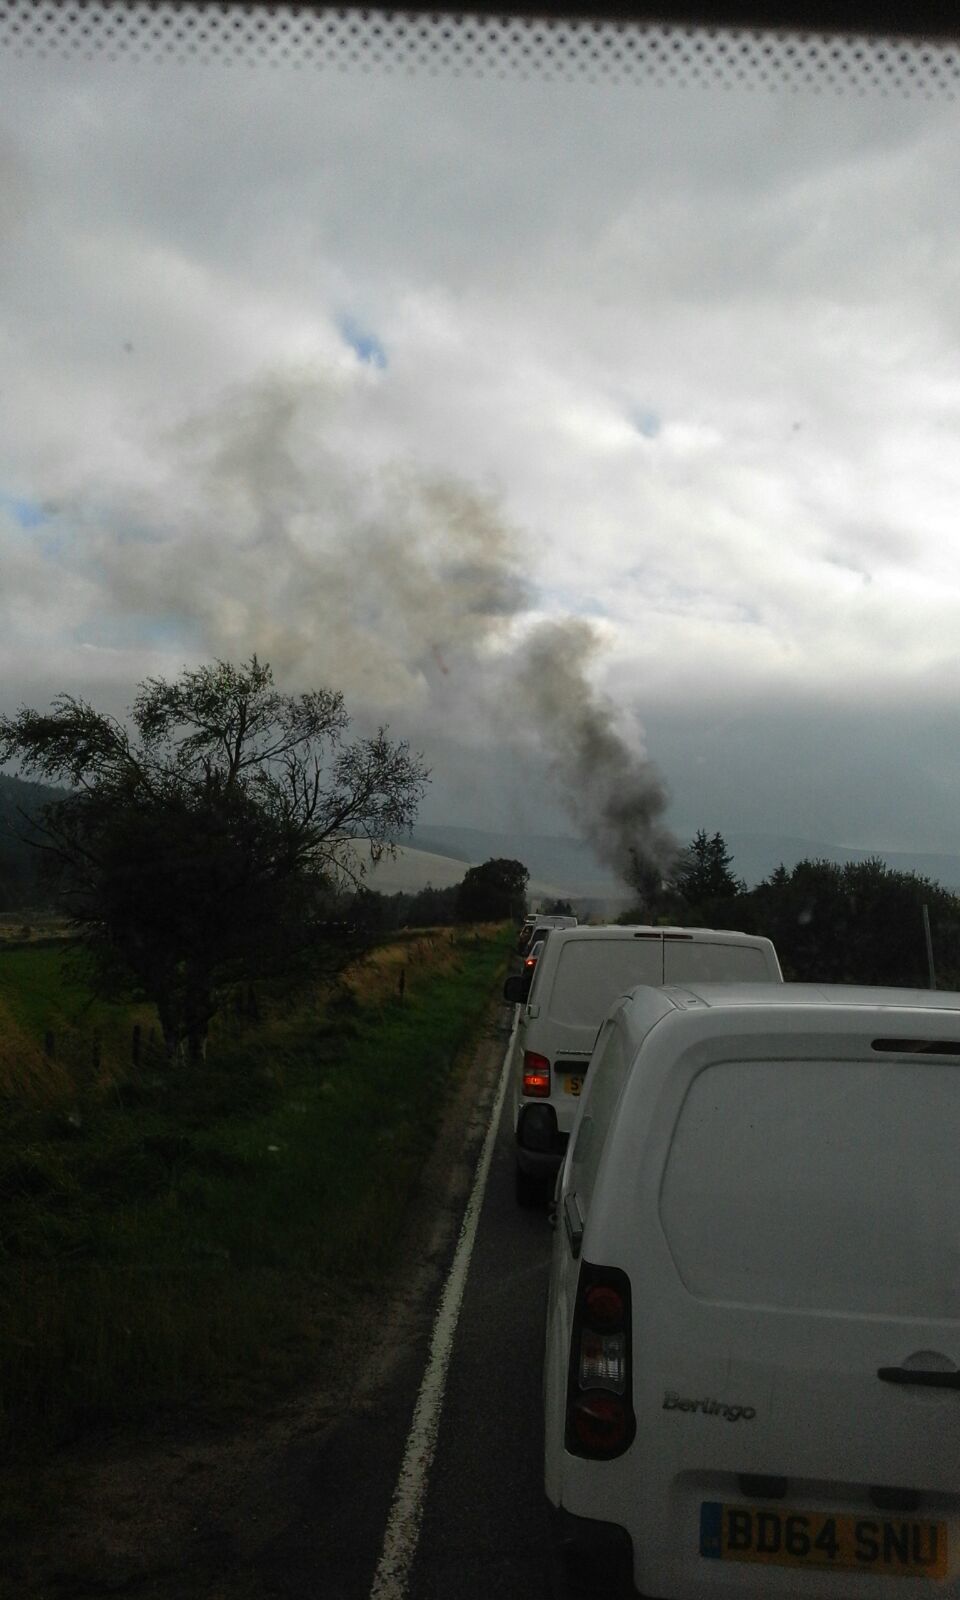 There were tailbacks along the A939 as firefighters attended the scene